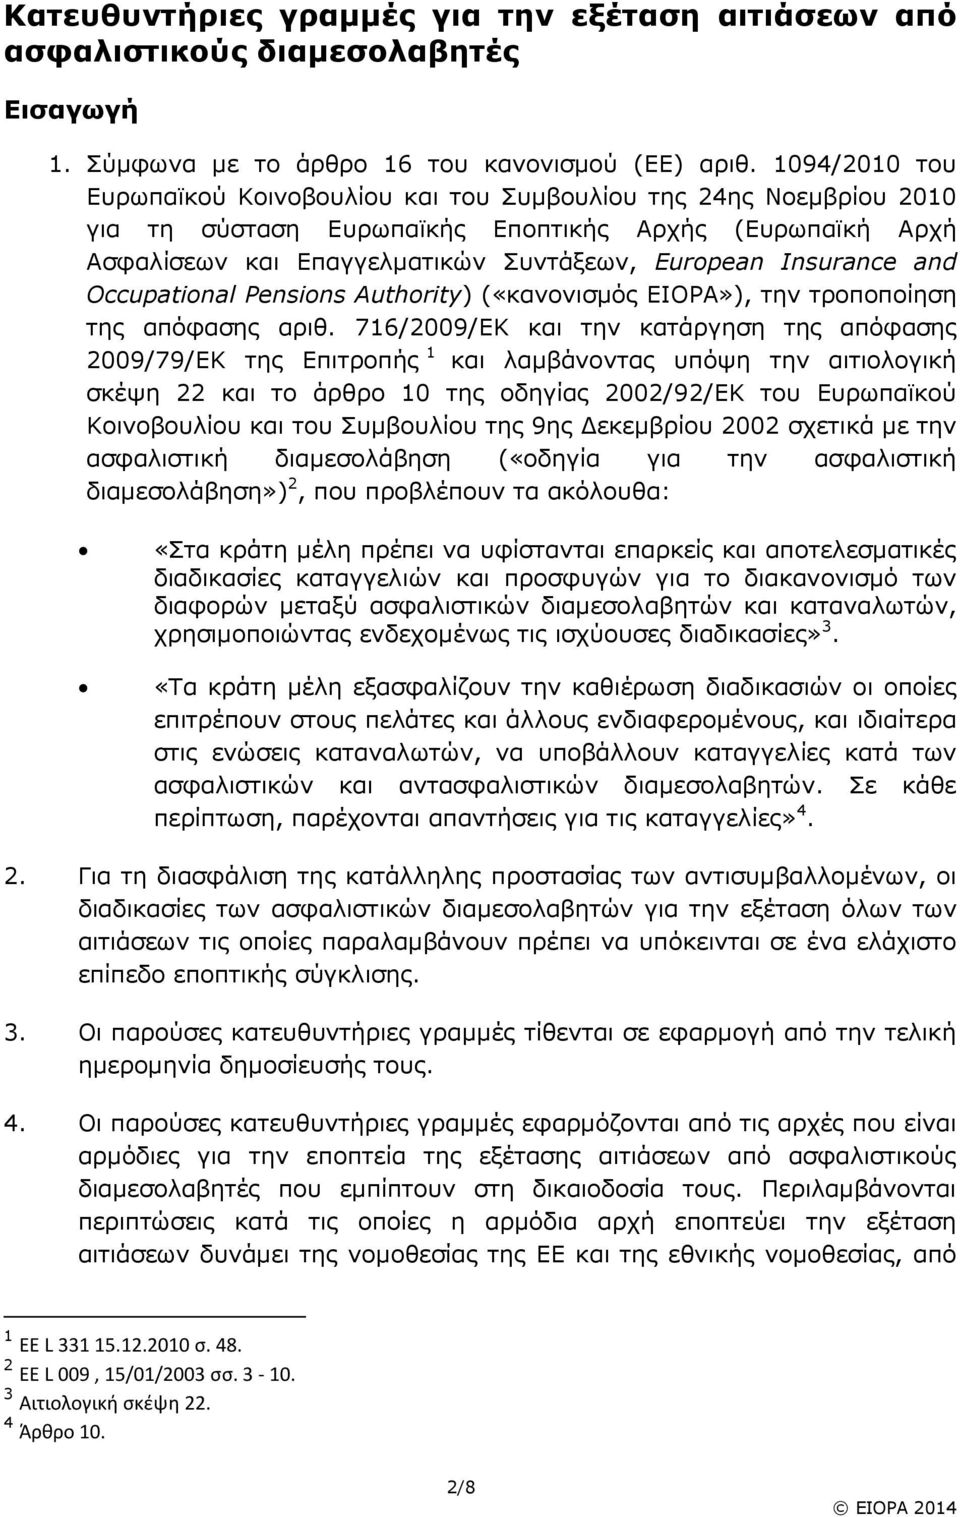 and Occupational Pensions Authority) («κανονισ5ός EIOPA»), την τροποποίηση της απόφασης αριθ.